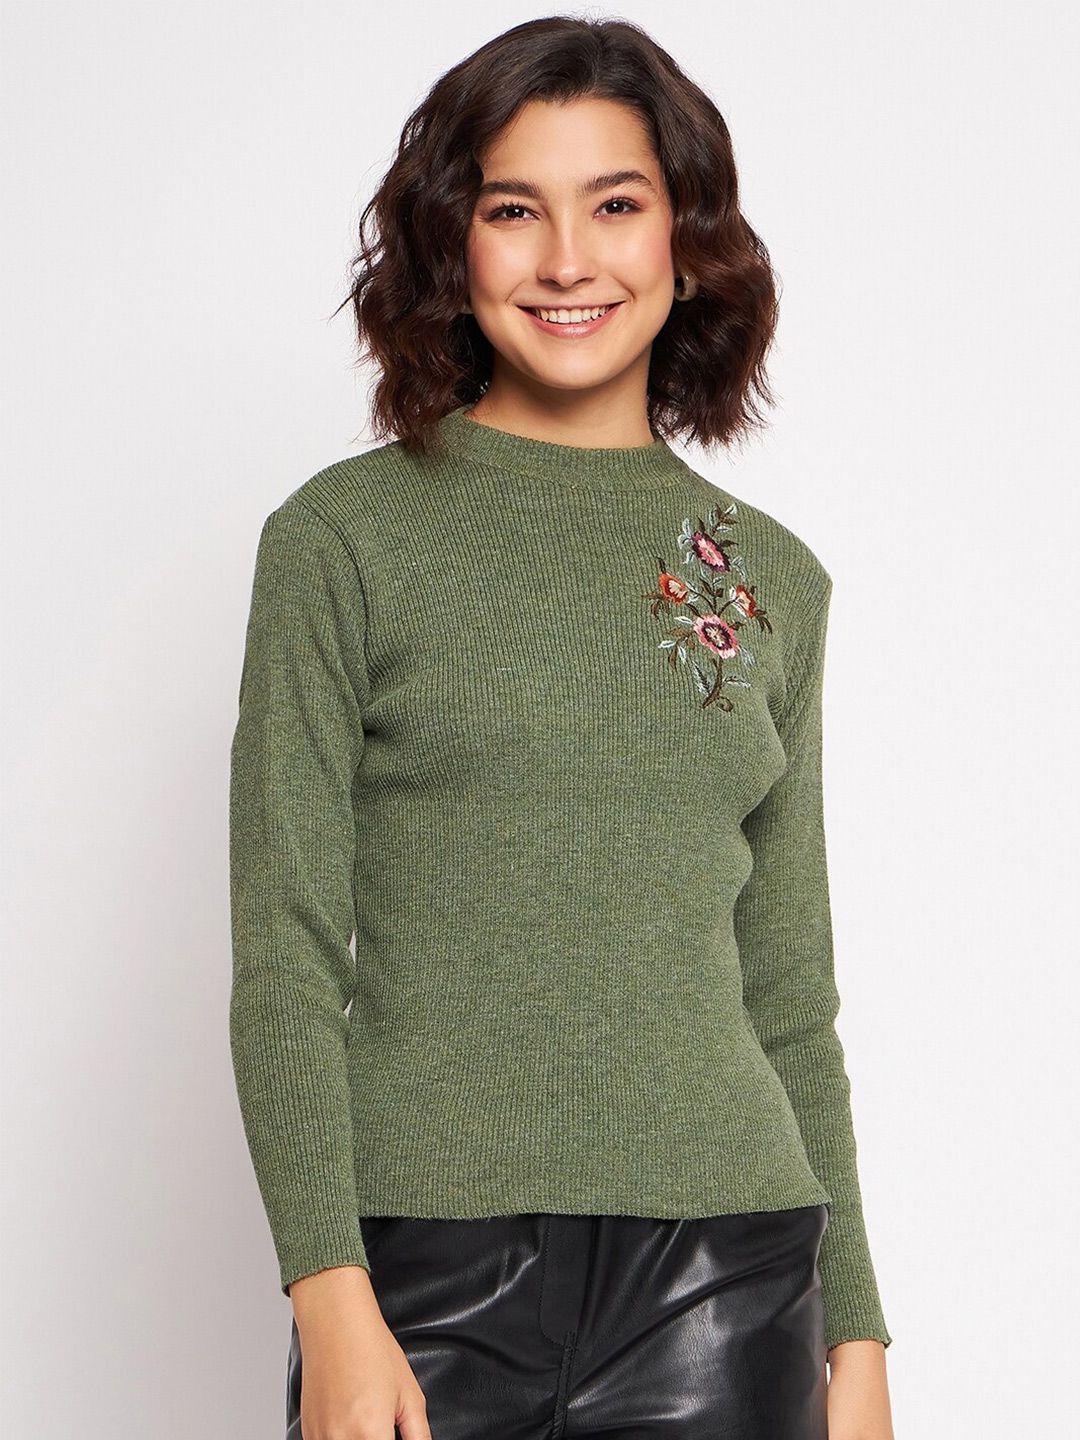 clapton ribbed floral embroidered mock collar pullover sweater